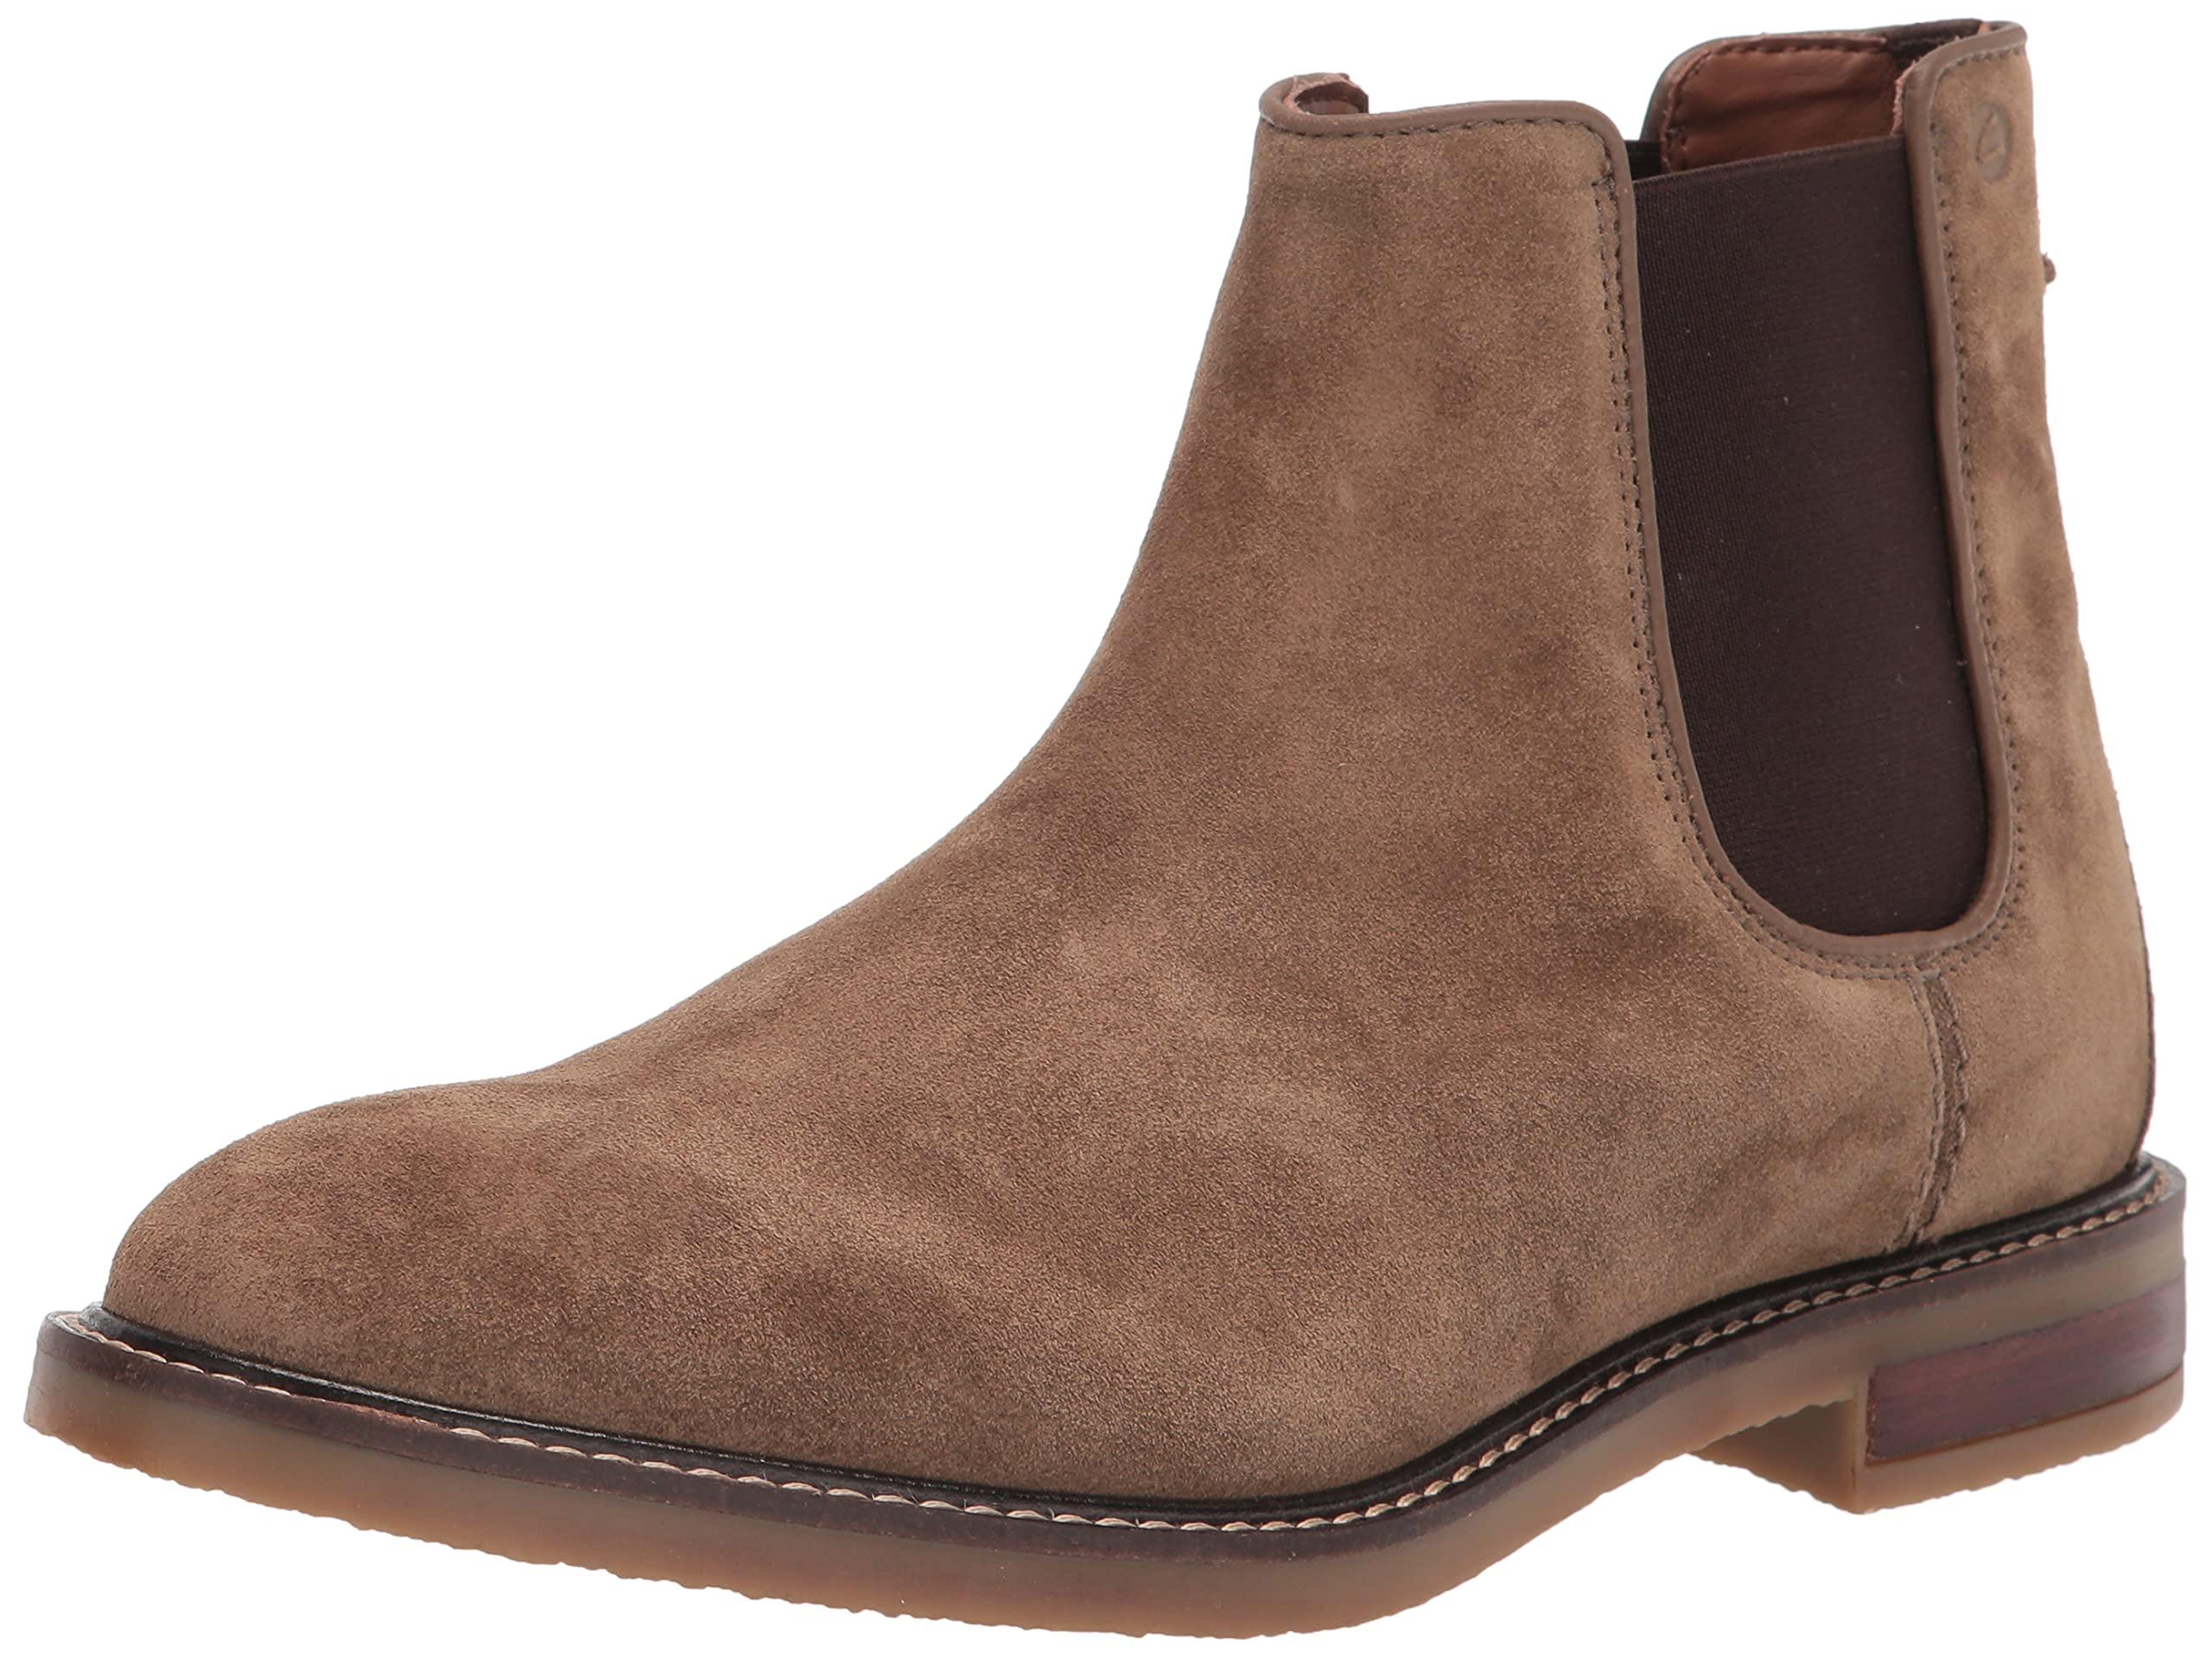 Clarks Jaxen Chelsea Boot in Taupe Suede (Brown) for Men - Save 16% | Lyst